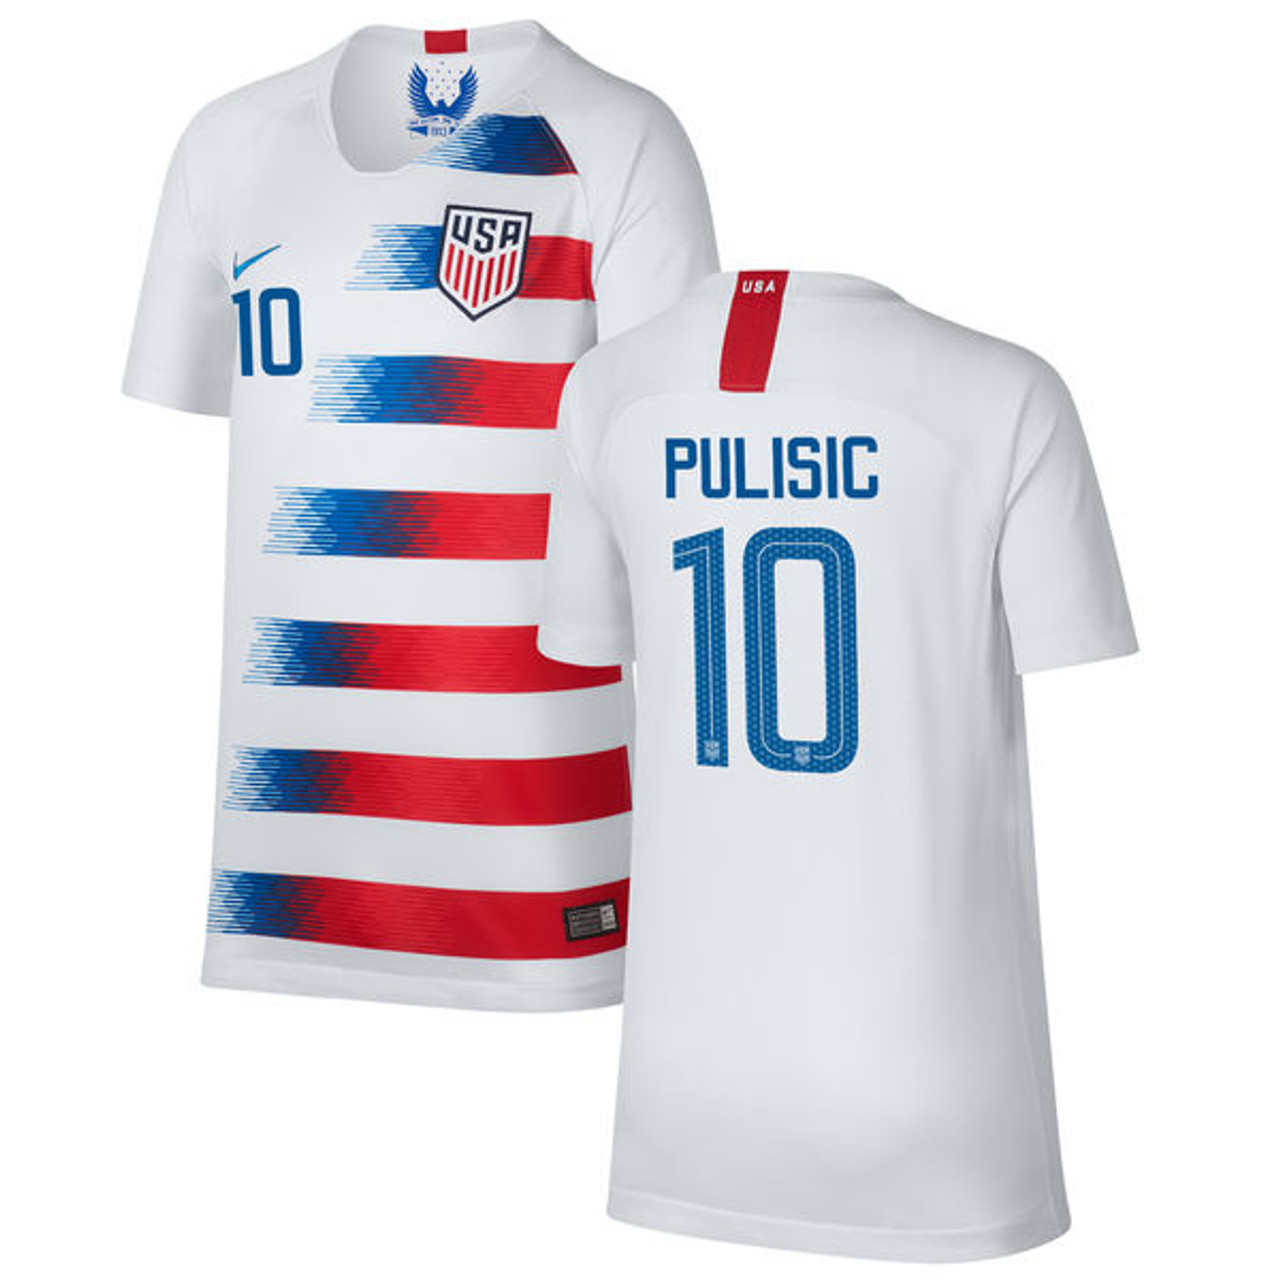 NIKE USA 2018 `PULISIC` HOME JERSEY - Soccer Plus